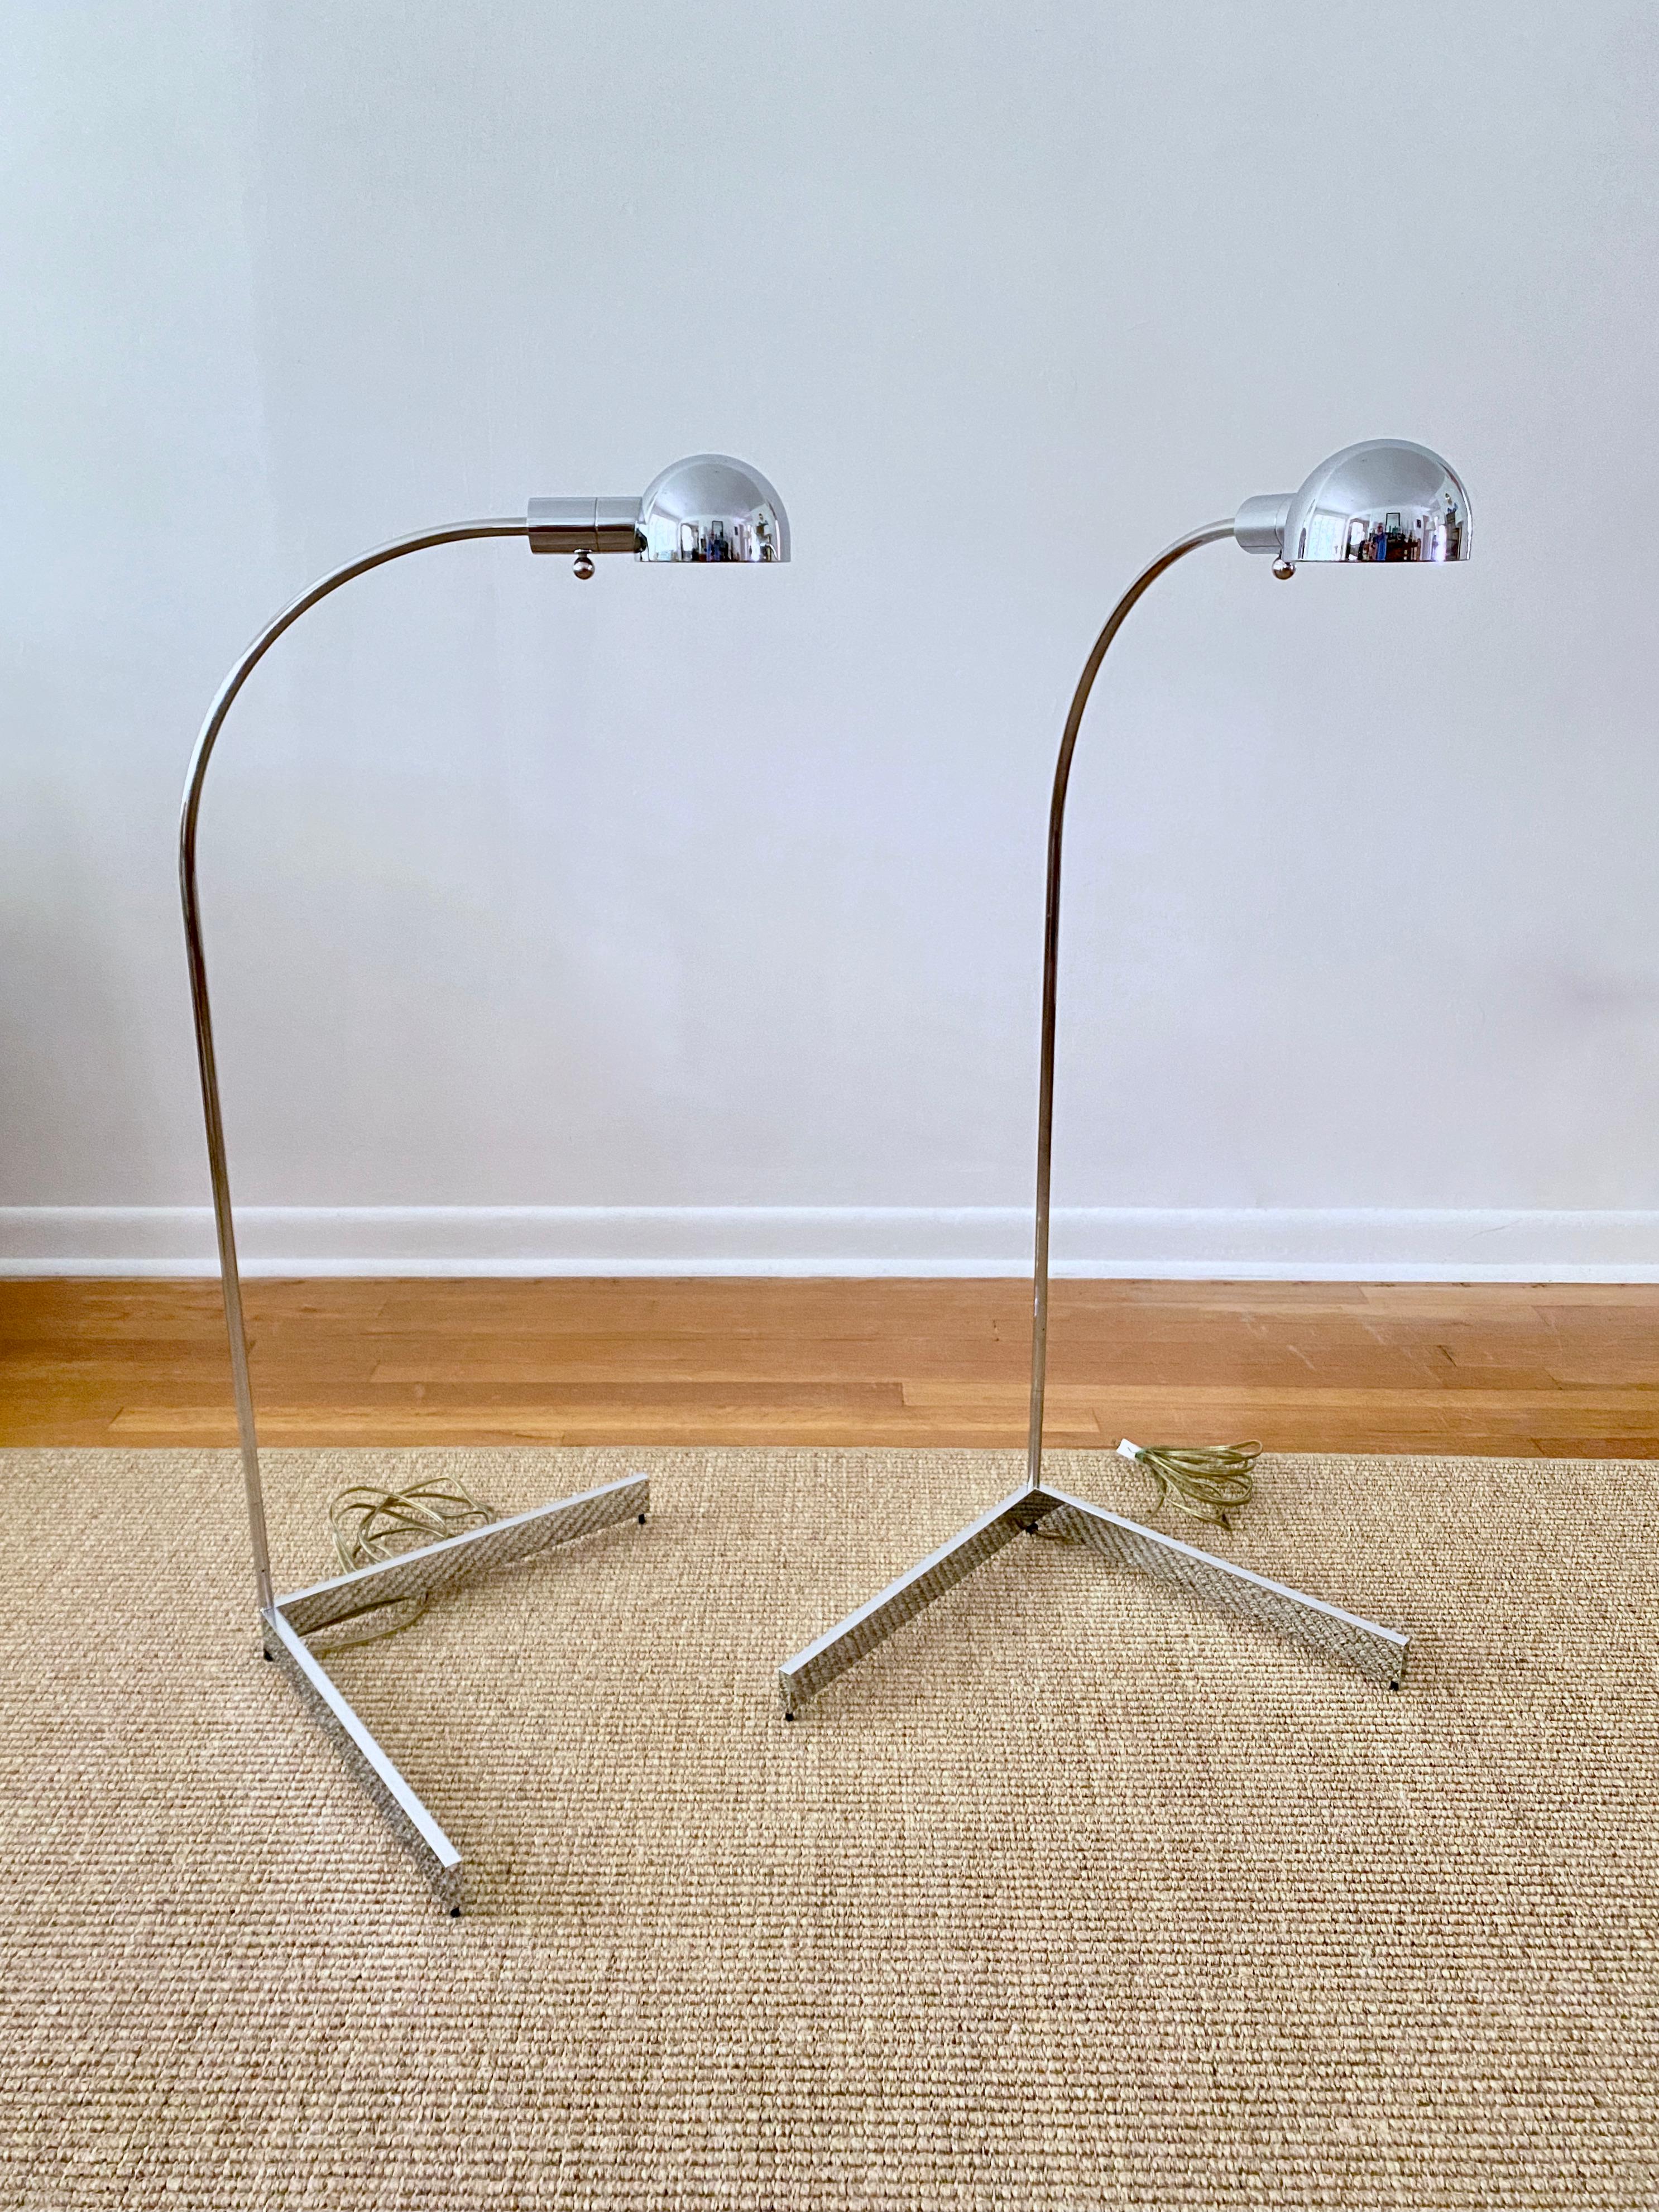 A vintage pair of Cedric Hartman floor lamps designed in 1966 and manufactured by The Afternoon Light Company (Cedric Hartman), Omaha, Nebraska. This model, 1H, was first introduced in 1966 and has been discontinued. The pair consists of a chrome